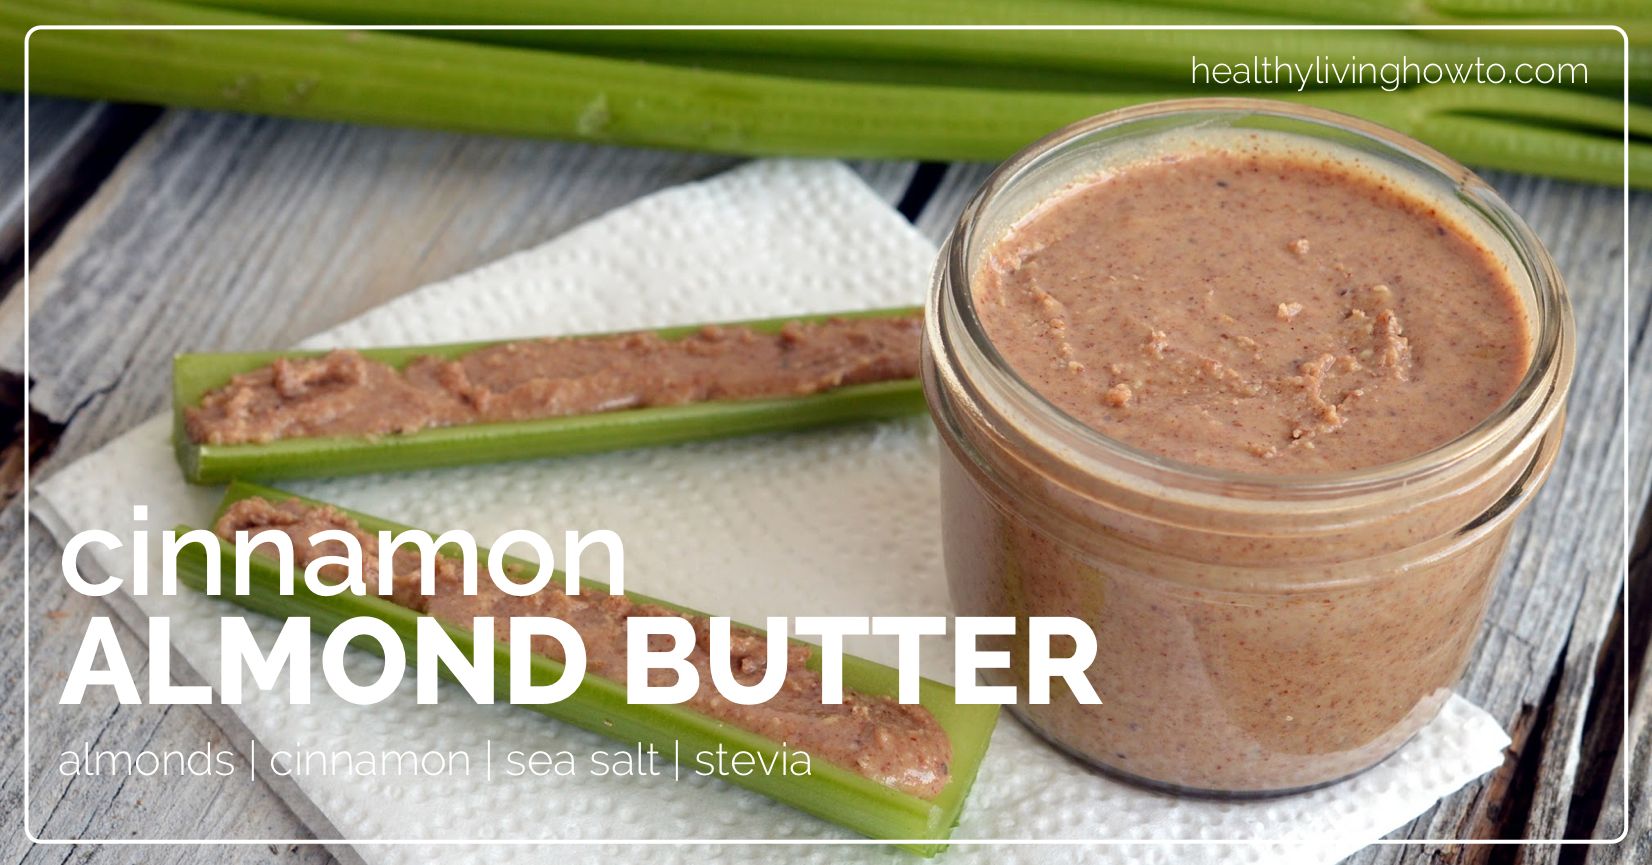 Healthy Recipe: Cinnamon Almond Butter | healthylivinghowto.com